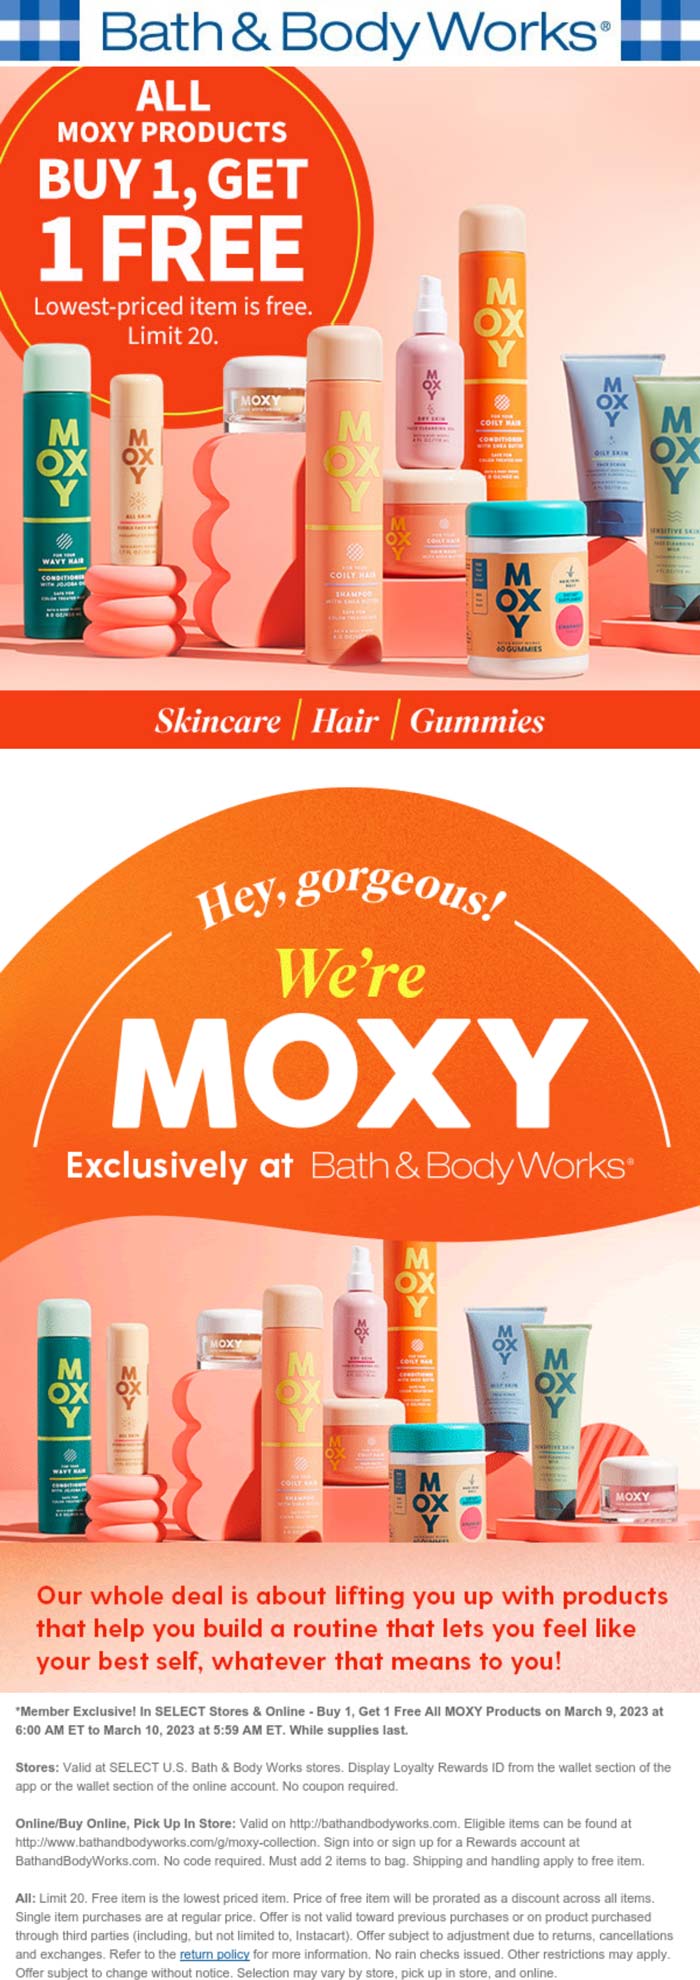 Bath & Body Works stores Coupon  Second moxy item free today at Bath & Body Works, ditto online #bathbodyworks 